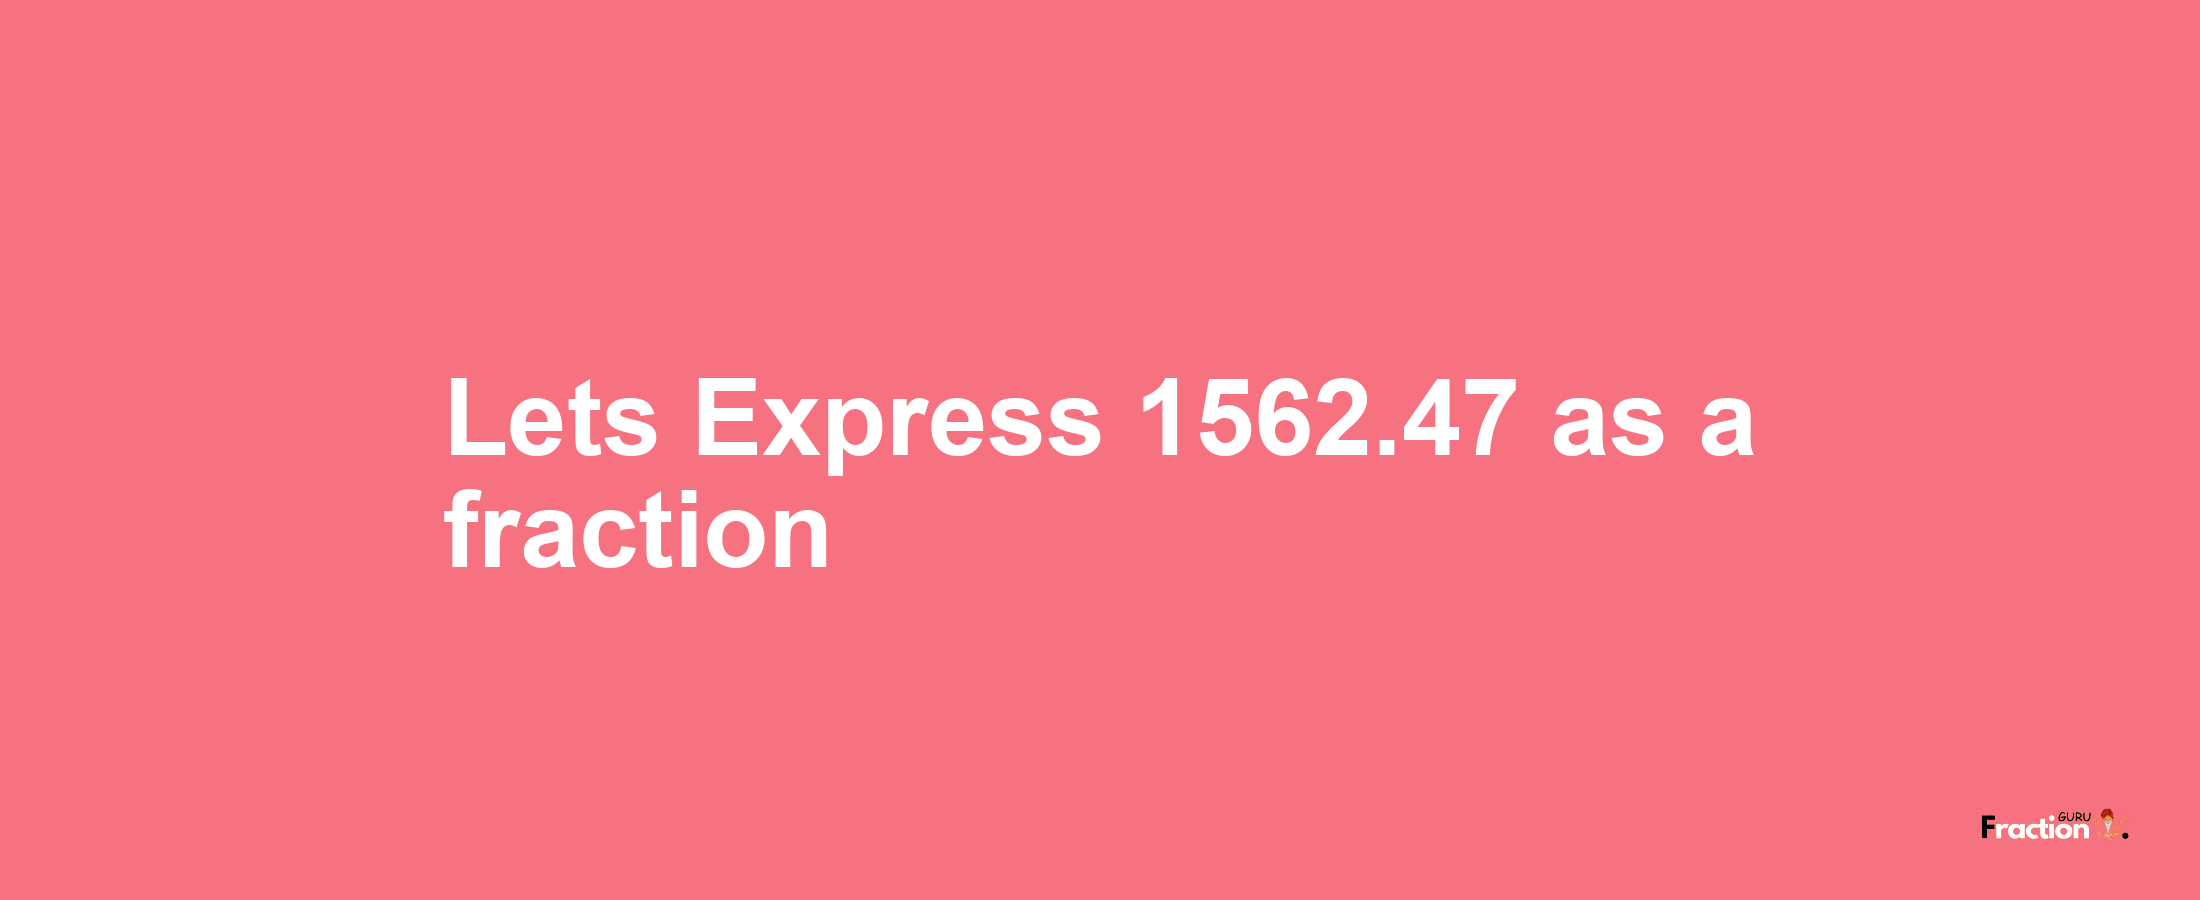 Lets Express 1562.47 as afraction